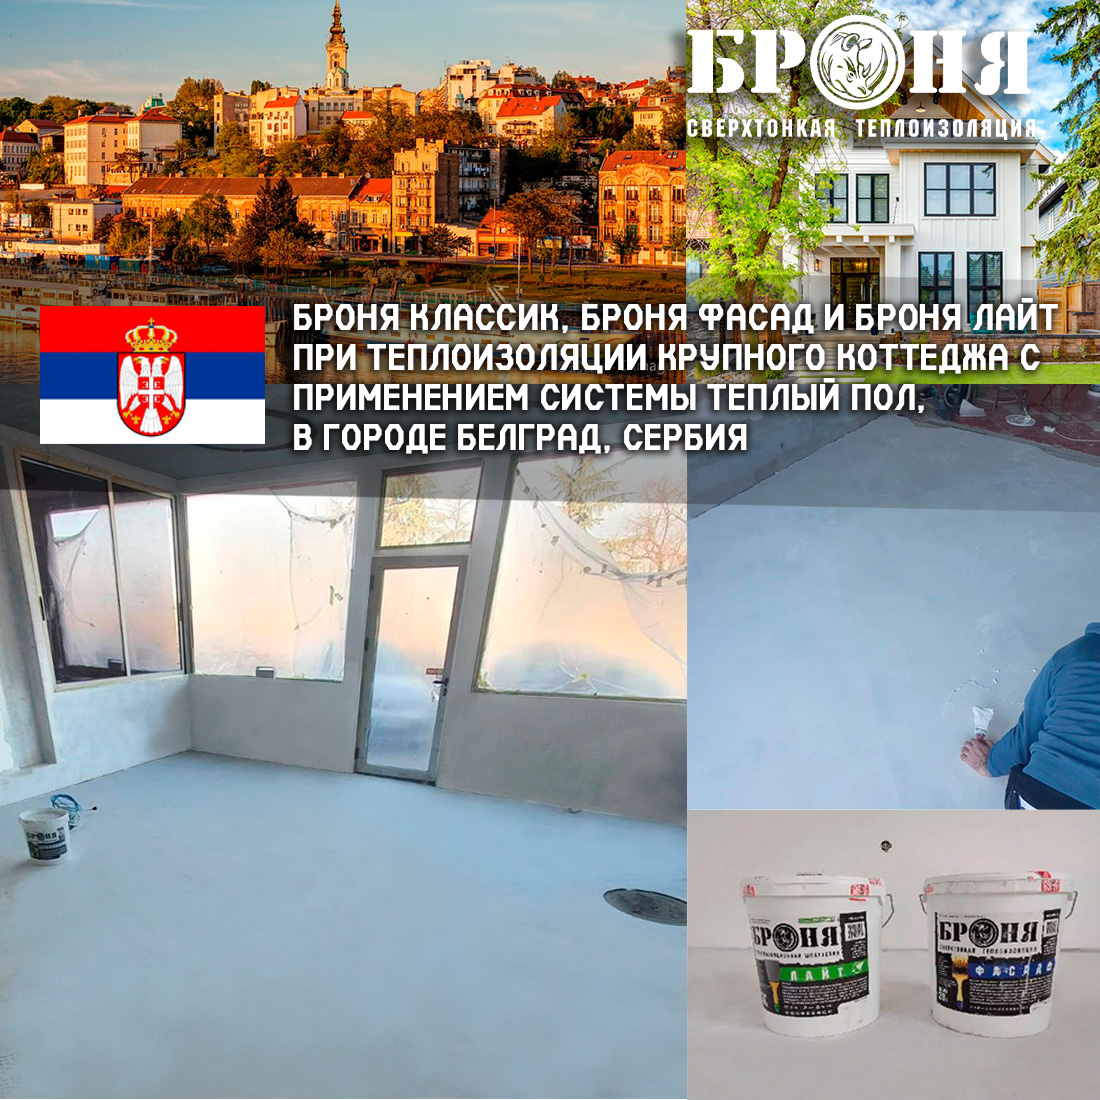 The application of Bronya Classic, Bronya Facade and Bronya Light for the thermal insulation of a large cottage using an underfloor heating system, in Belgrade, Serbia (photos and videos)